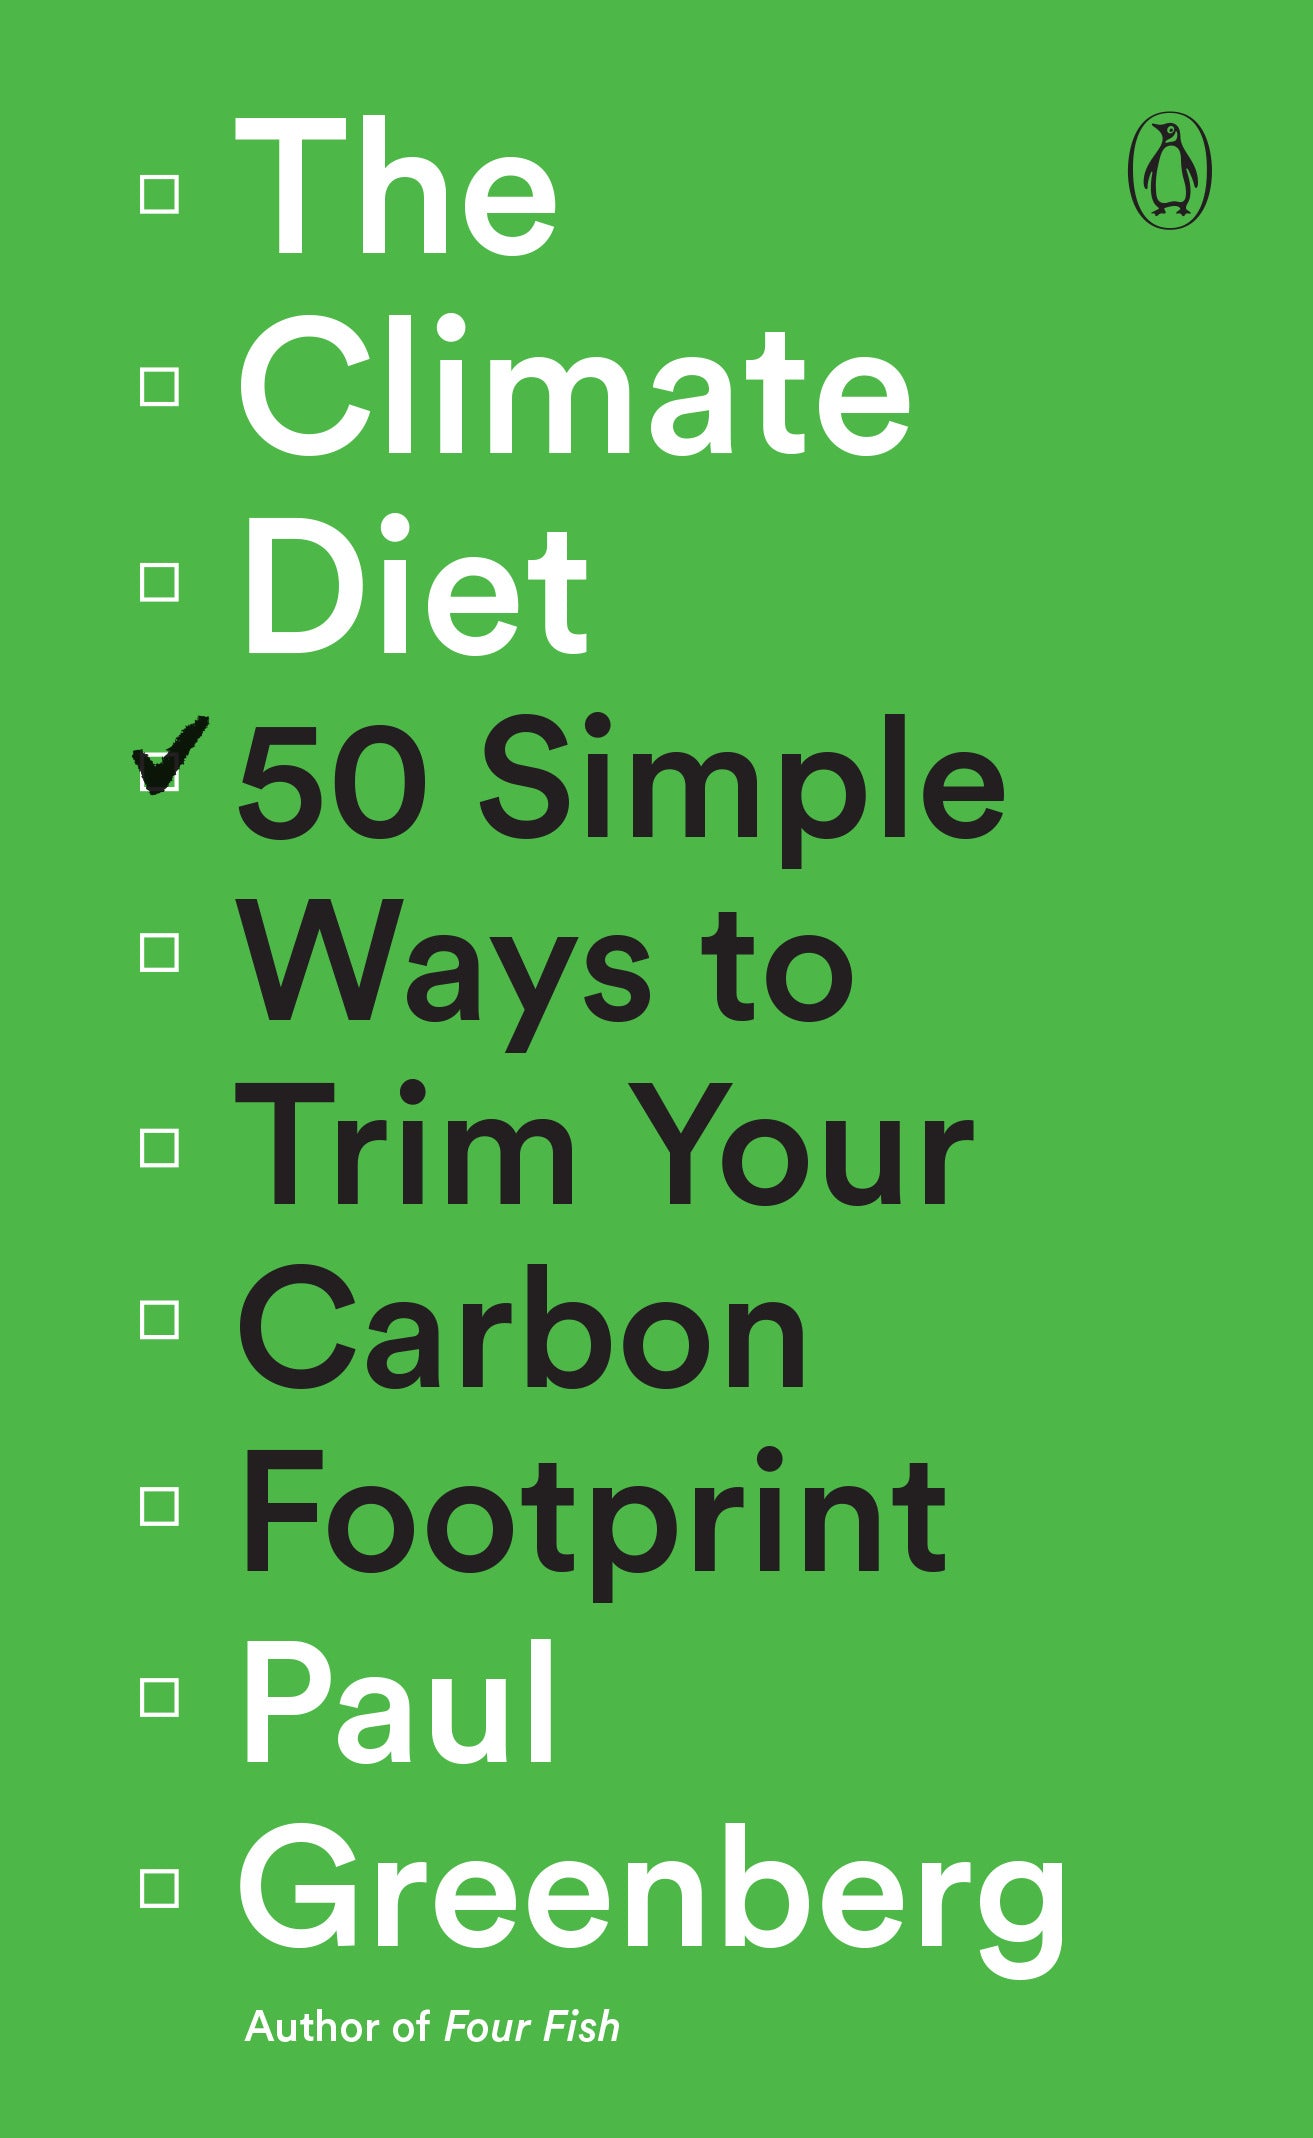 Green book cover for Paul Greenberg's book, The Climate Diet